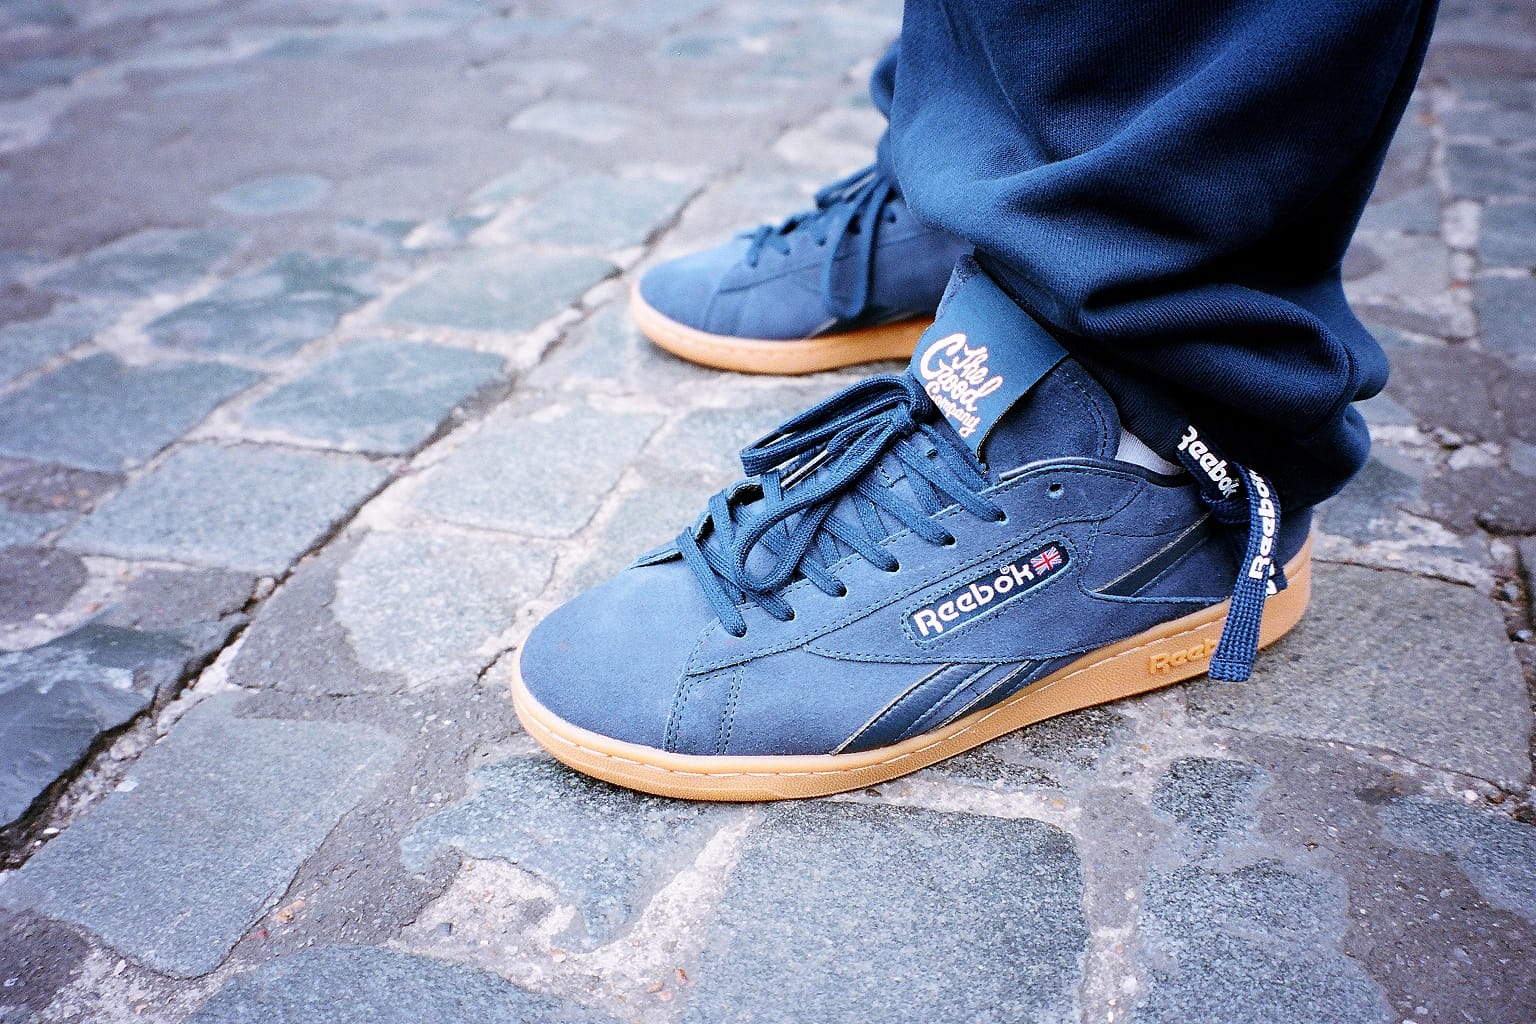 reebok capsule collection